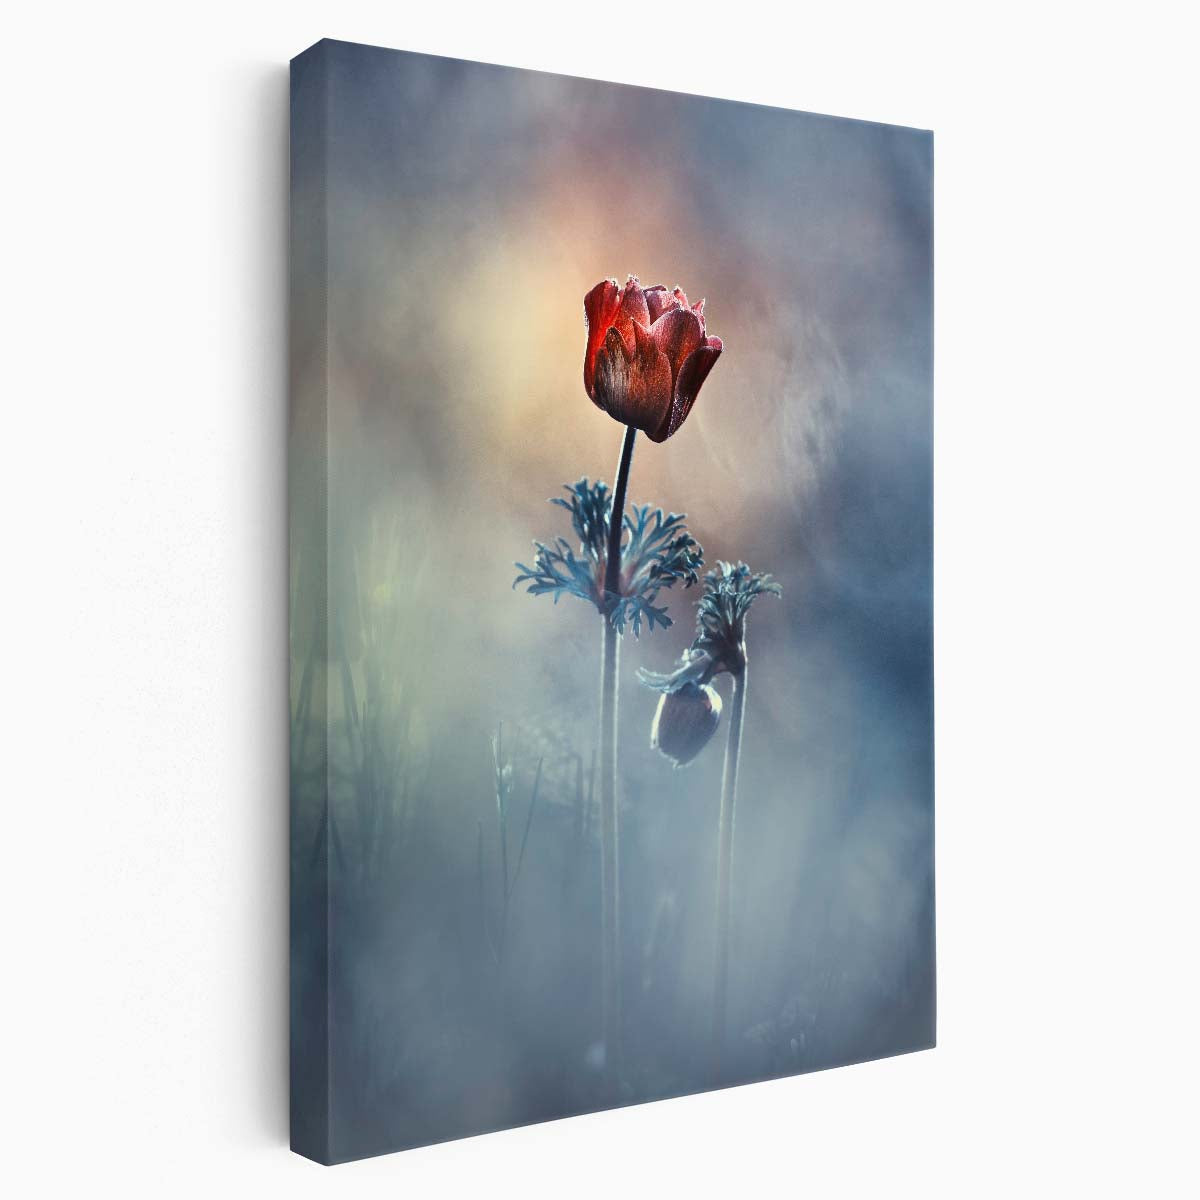 Romantic Red Rose Macro Photography Wall Art by Fabien Bravin by Luxuriance Designs, made in USA